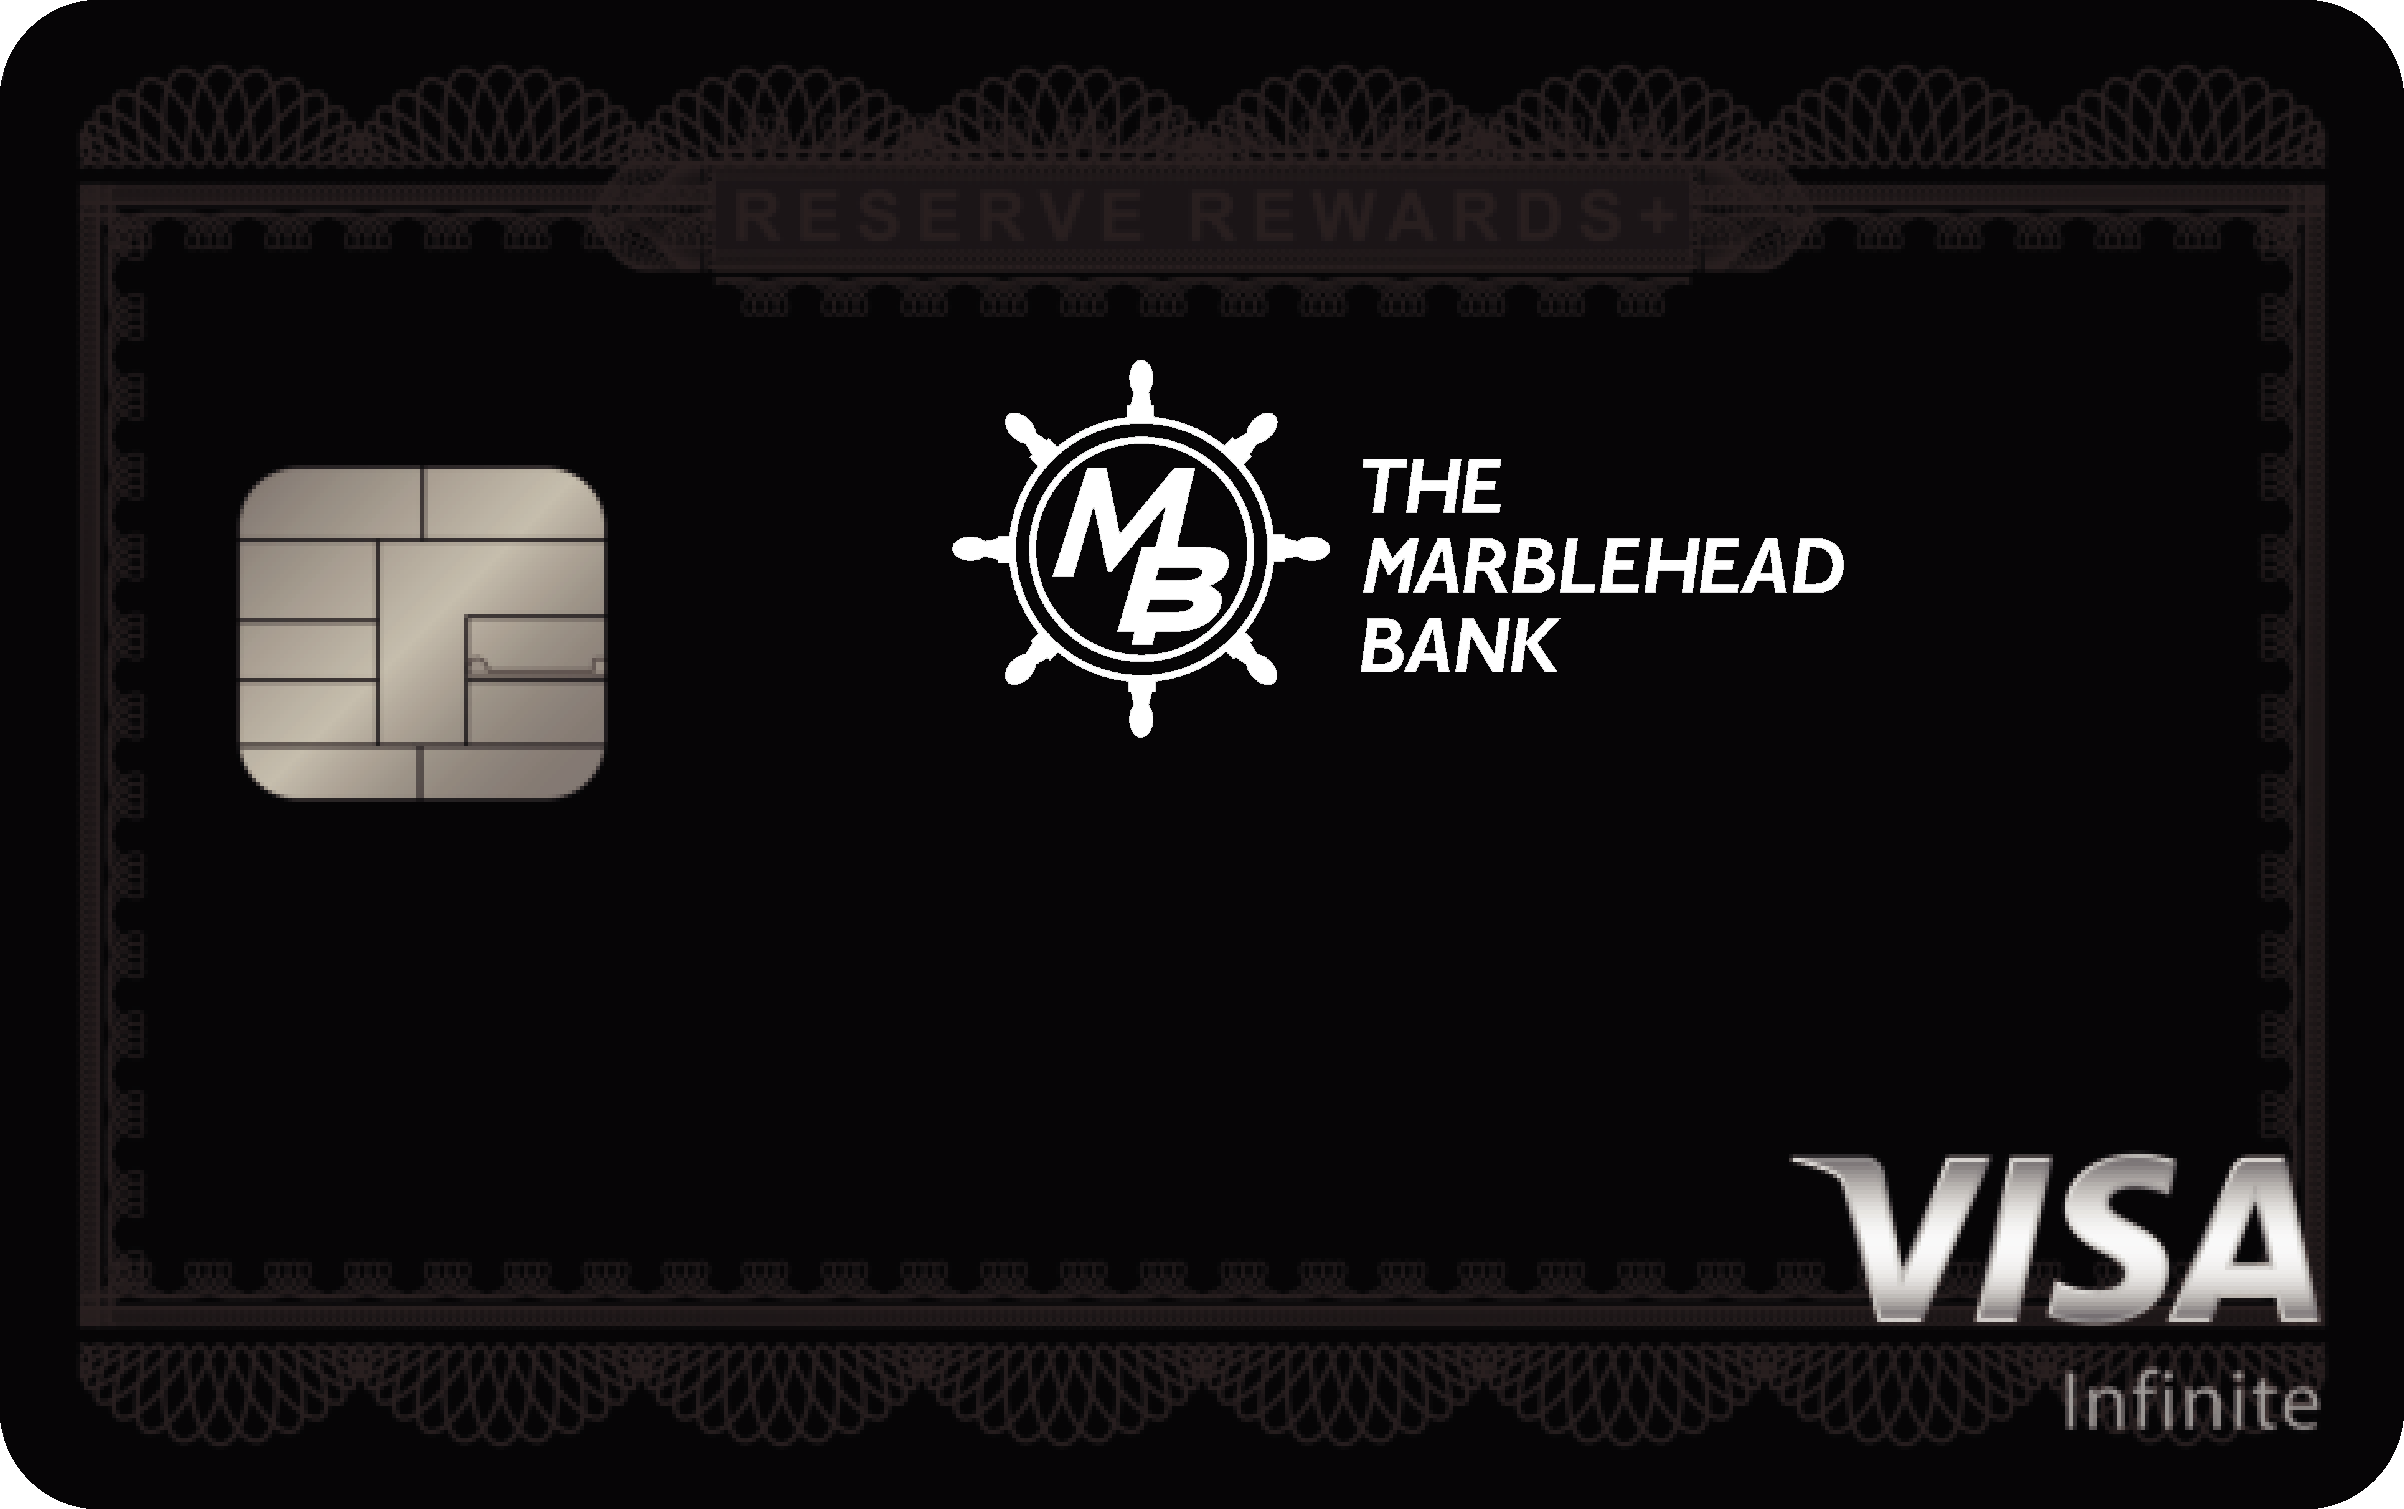 THE MARBLEHEAD BANK Reserve Rewards+ Card